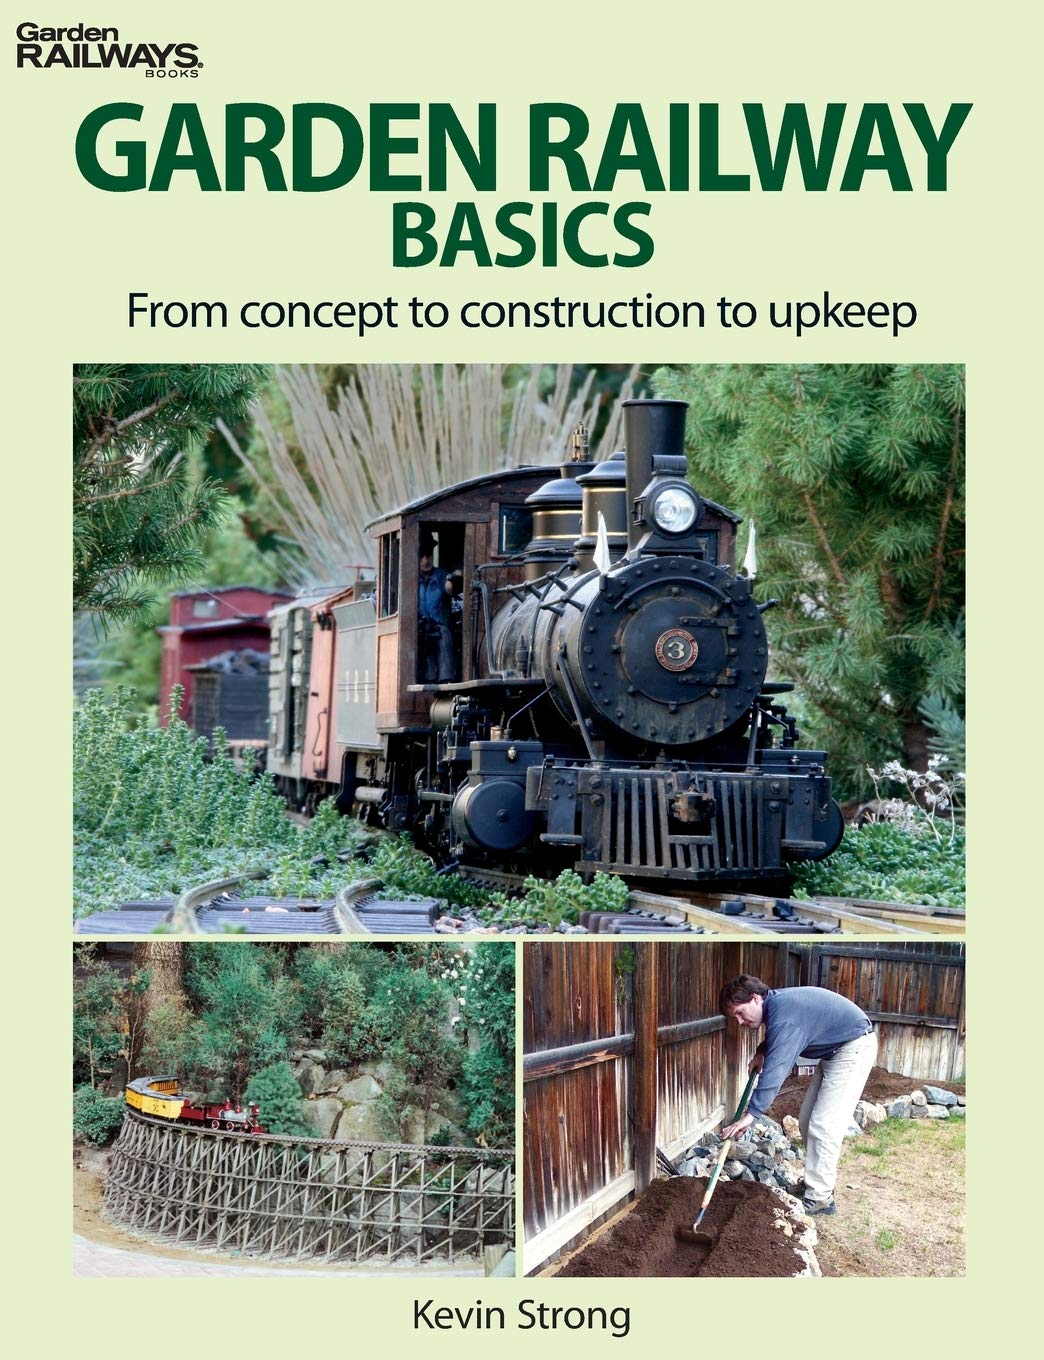 Garden Railway Basics From Concept to Construction to Upkeep book #12468 G scale